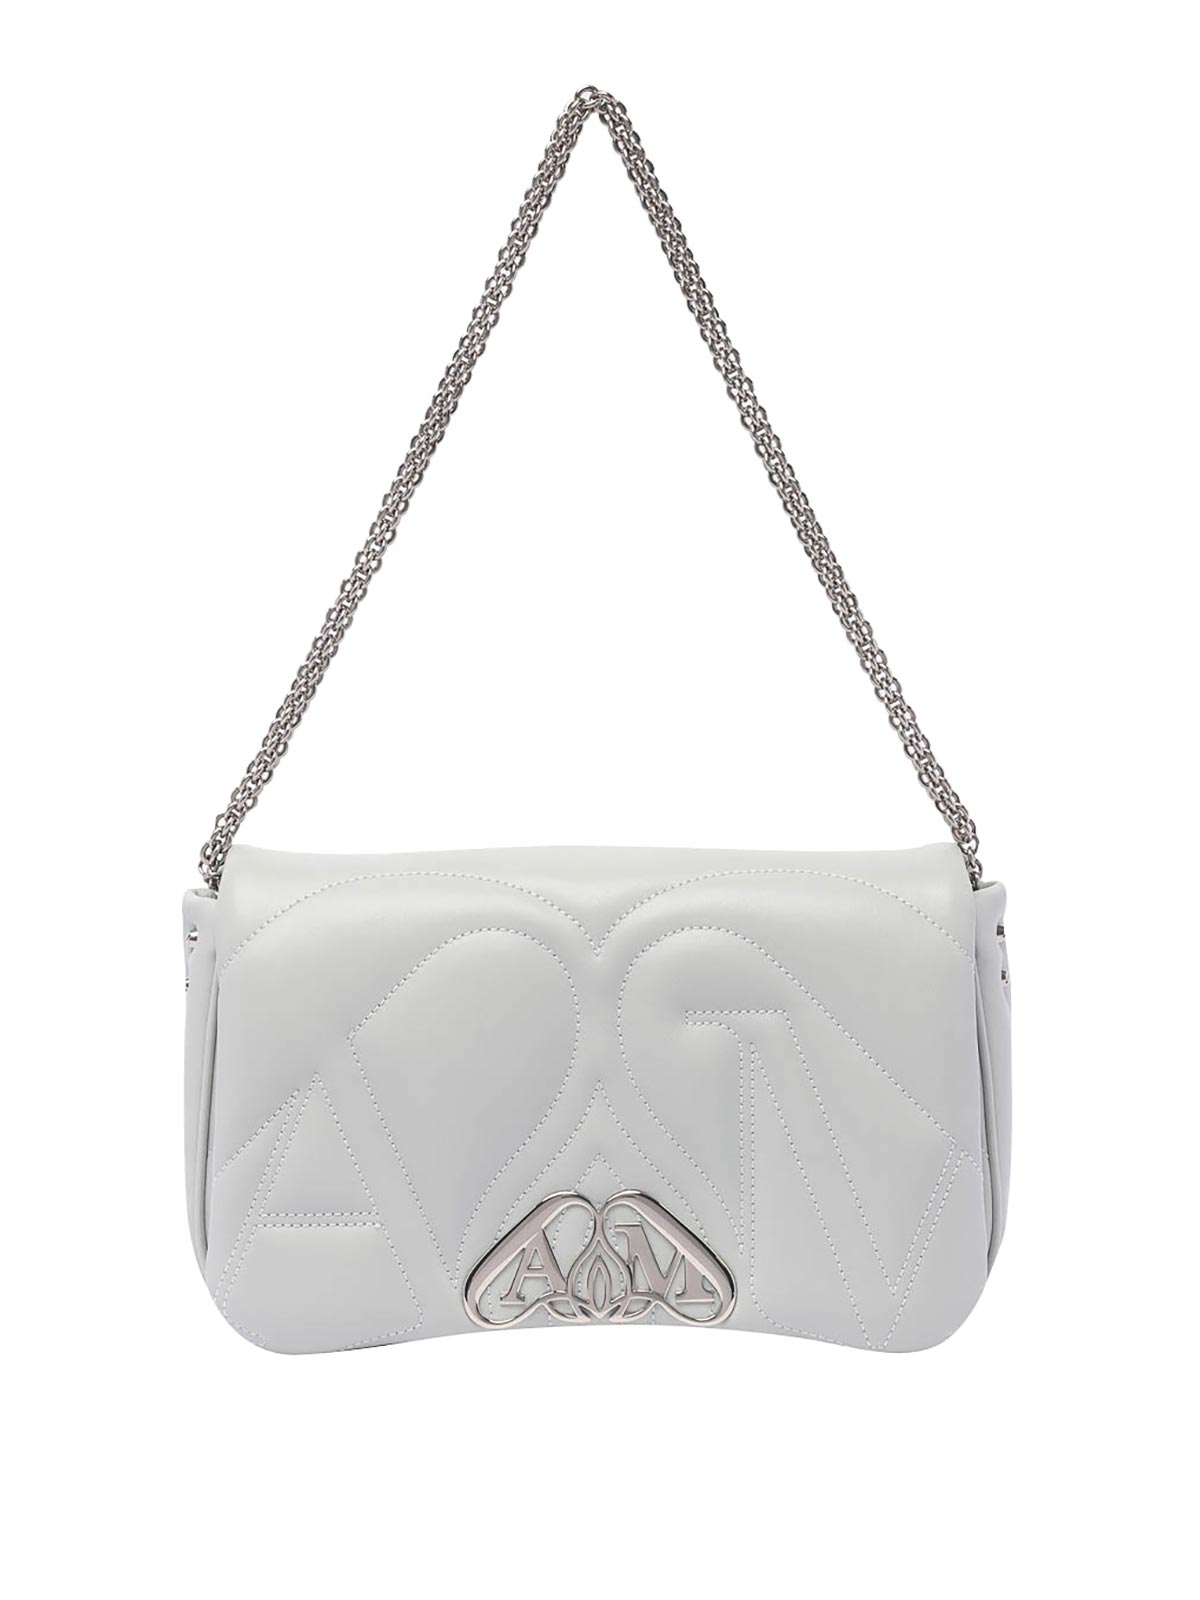 Alexander Mcqueen Small The Seal Shoulder Bag In White